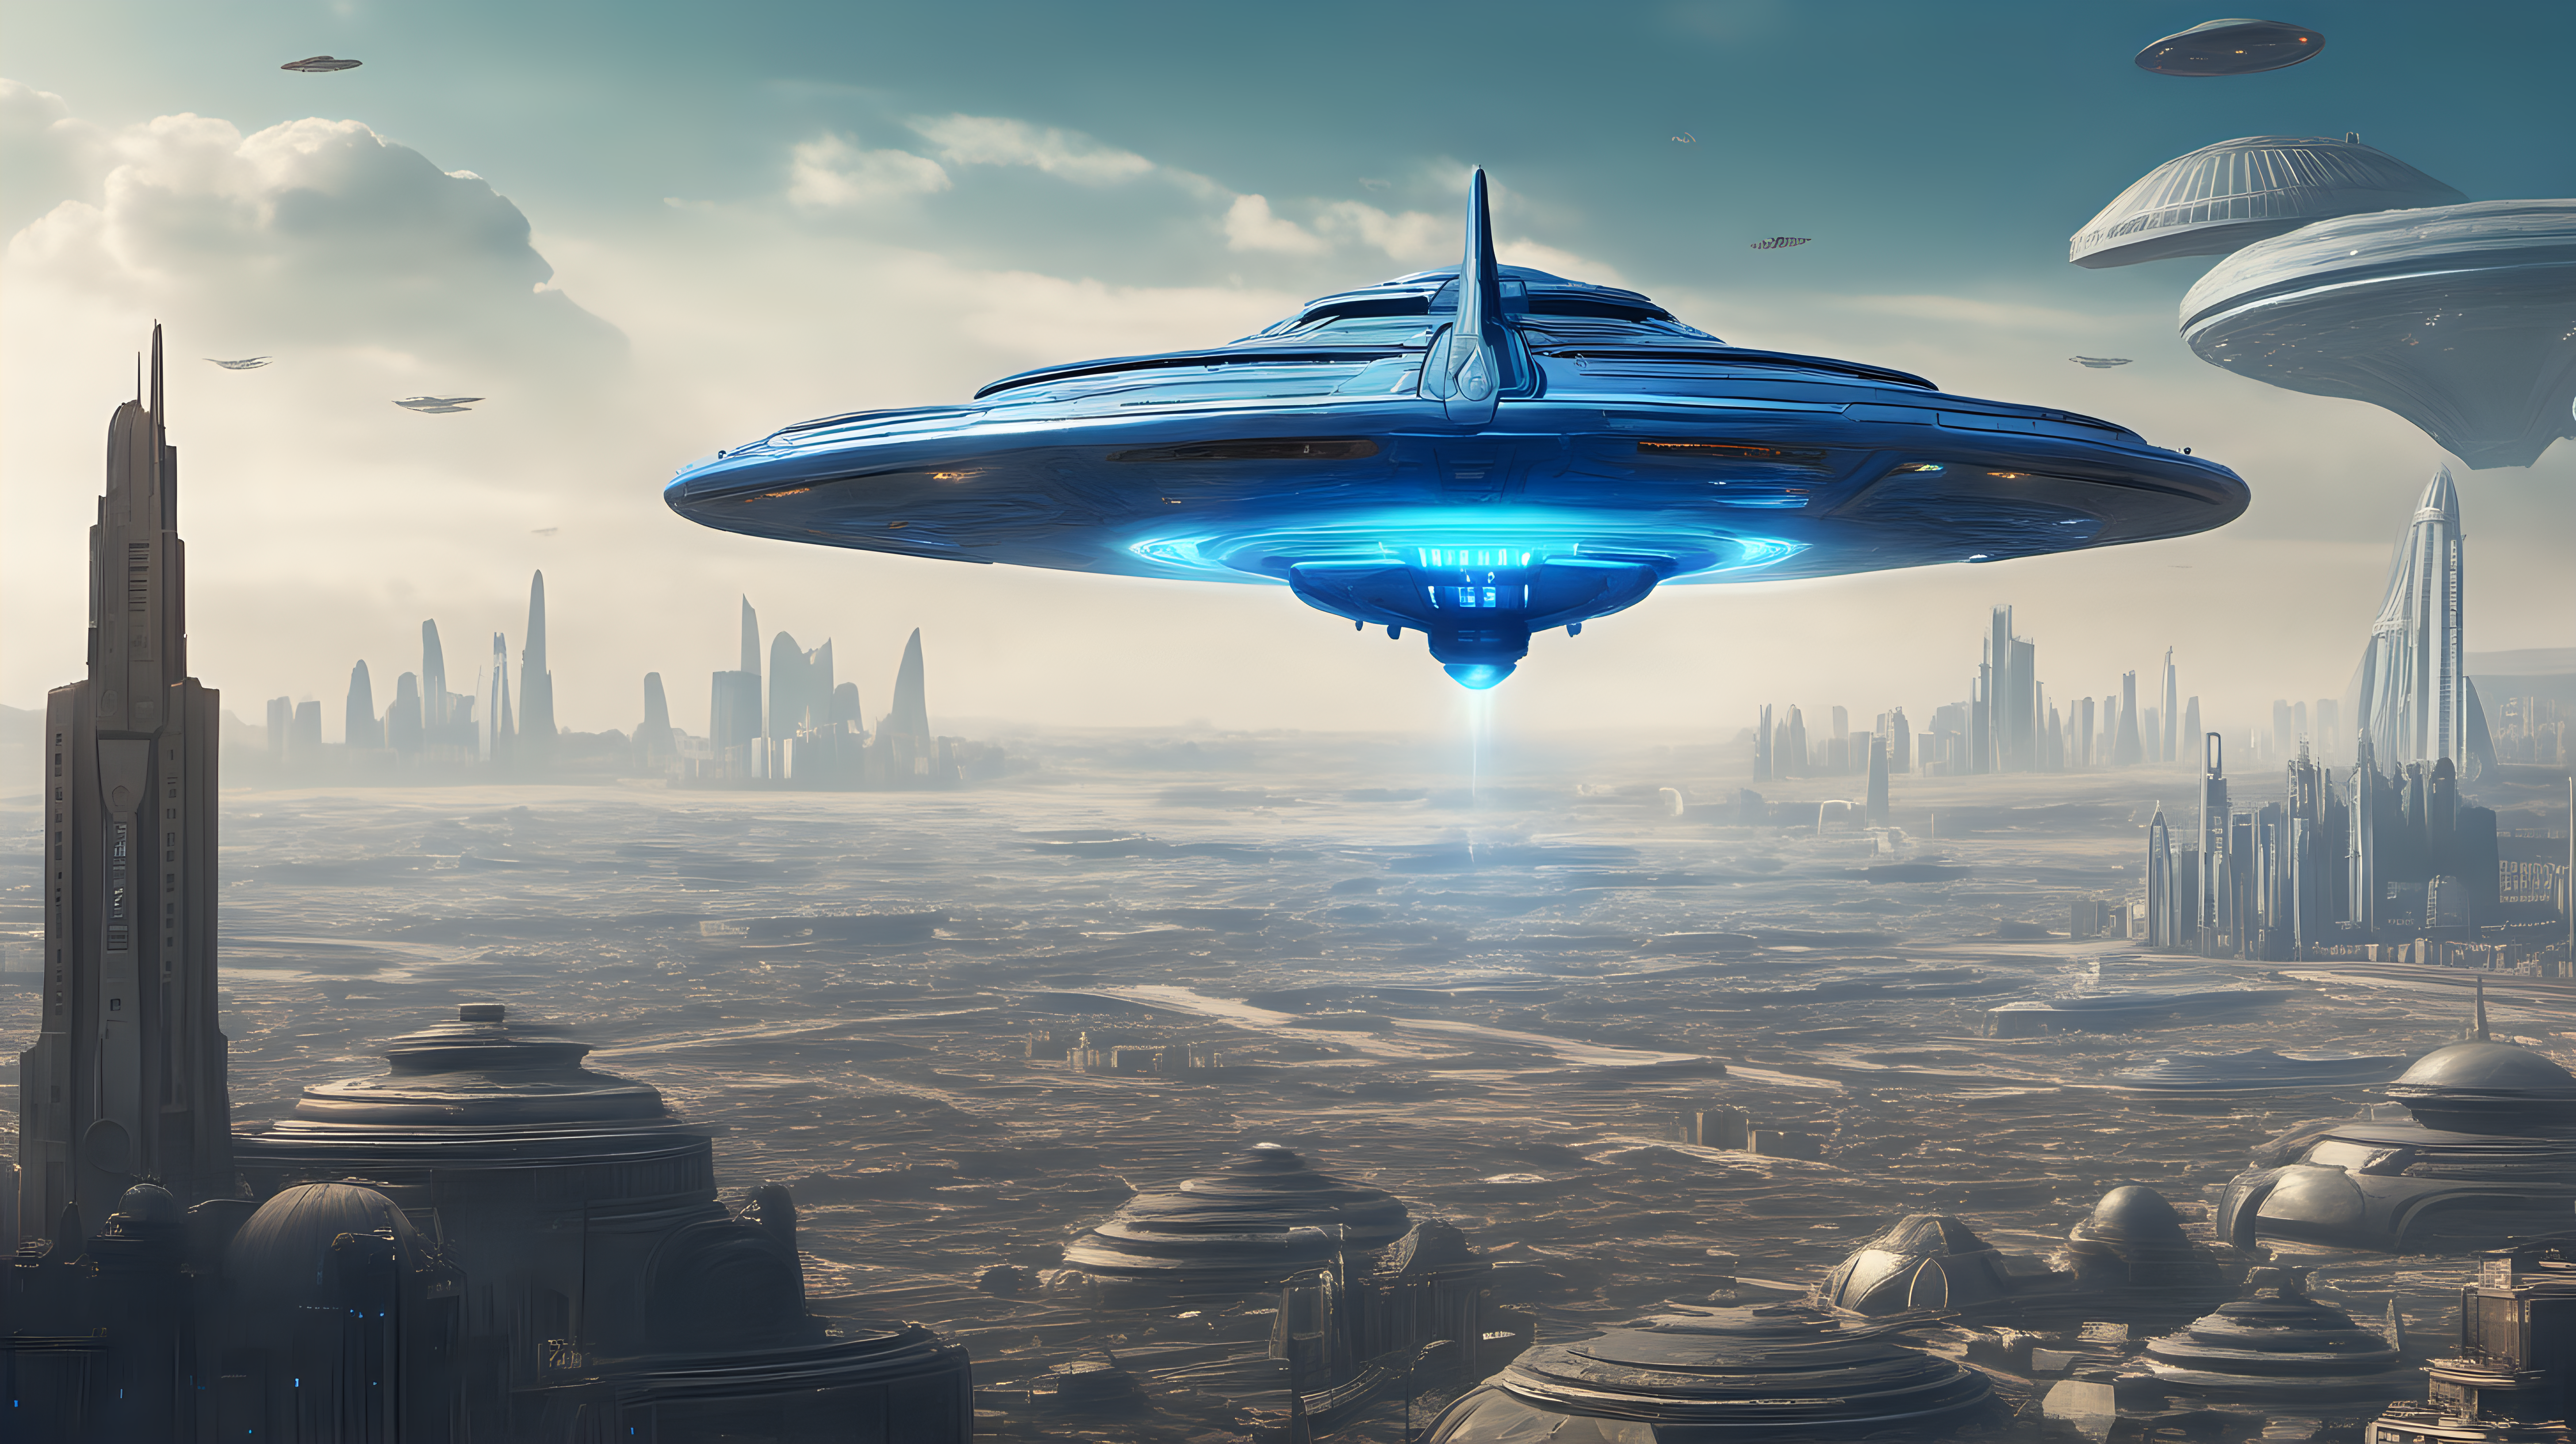 A blue alien spacecraft hovering in the foreground, a huge alien city in the background.